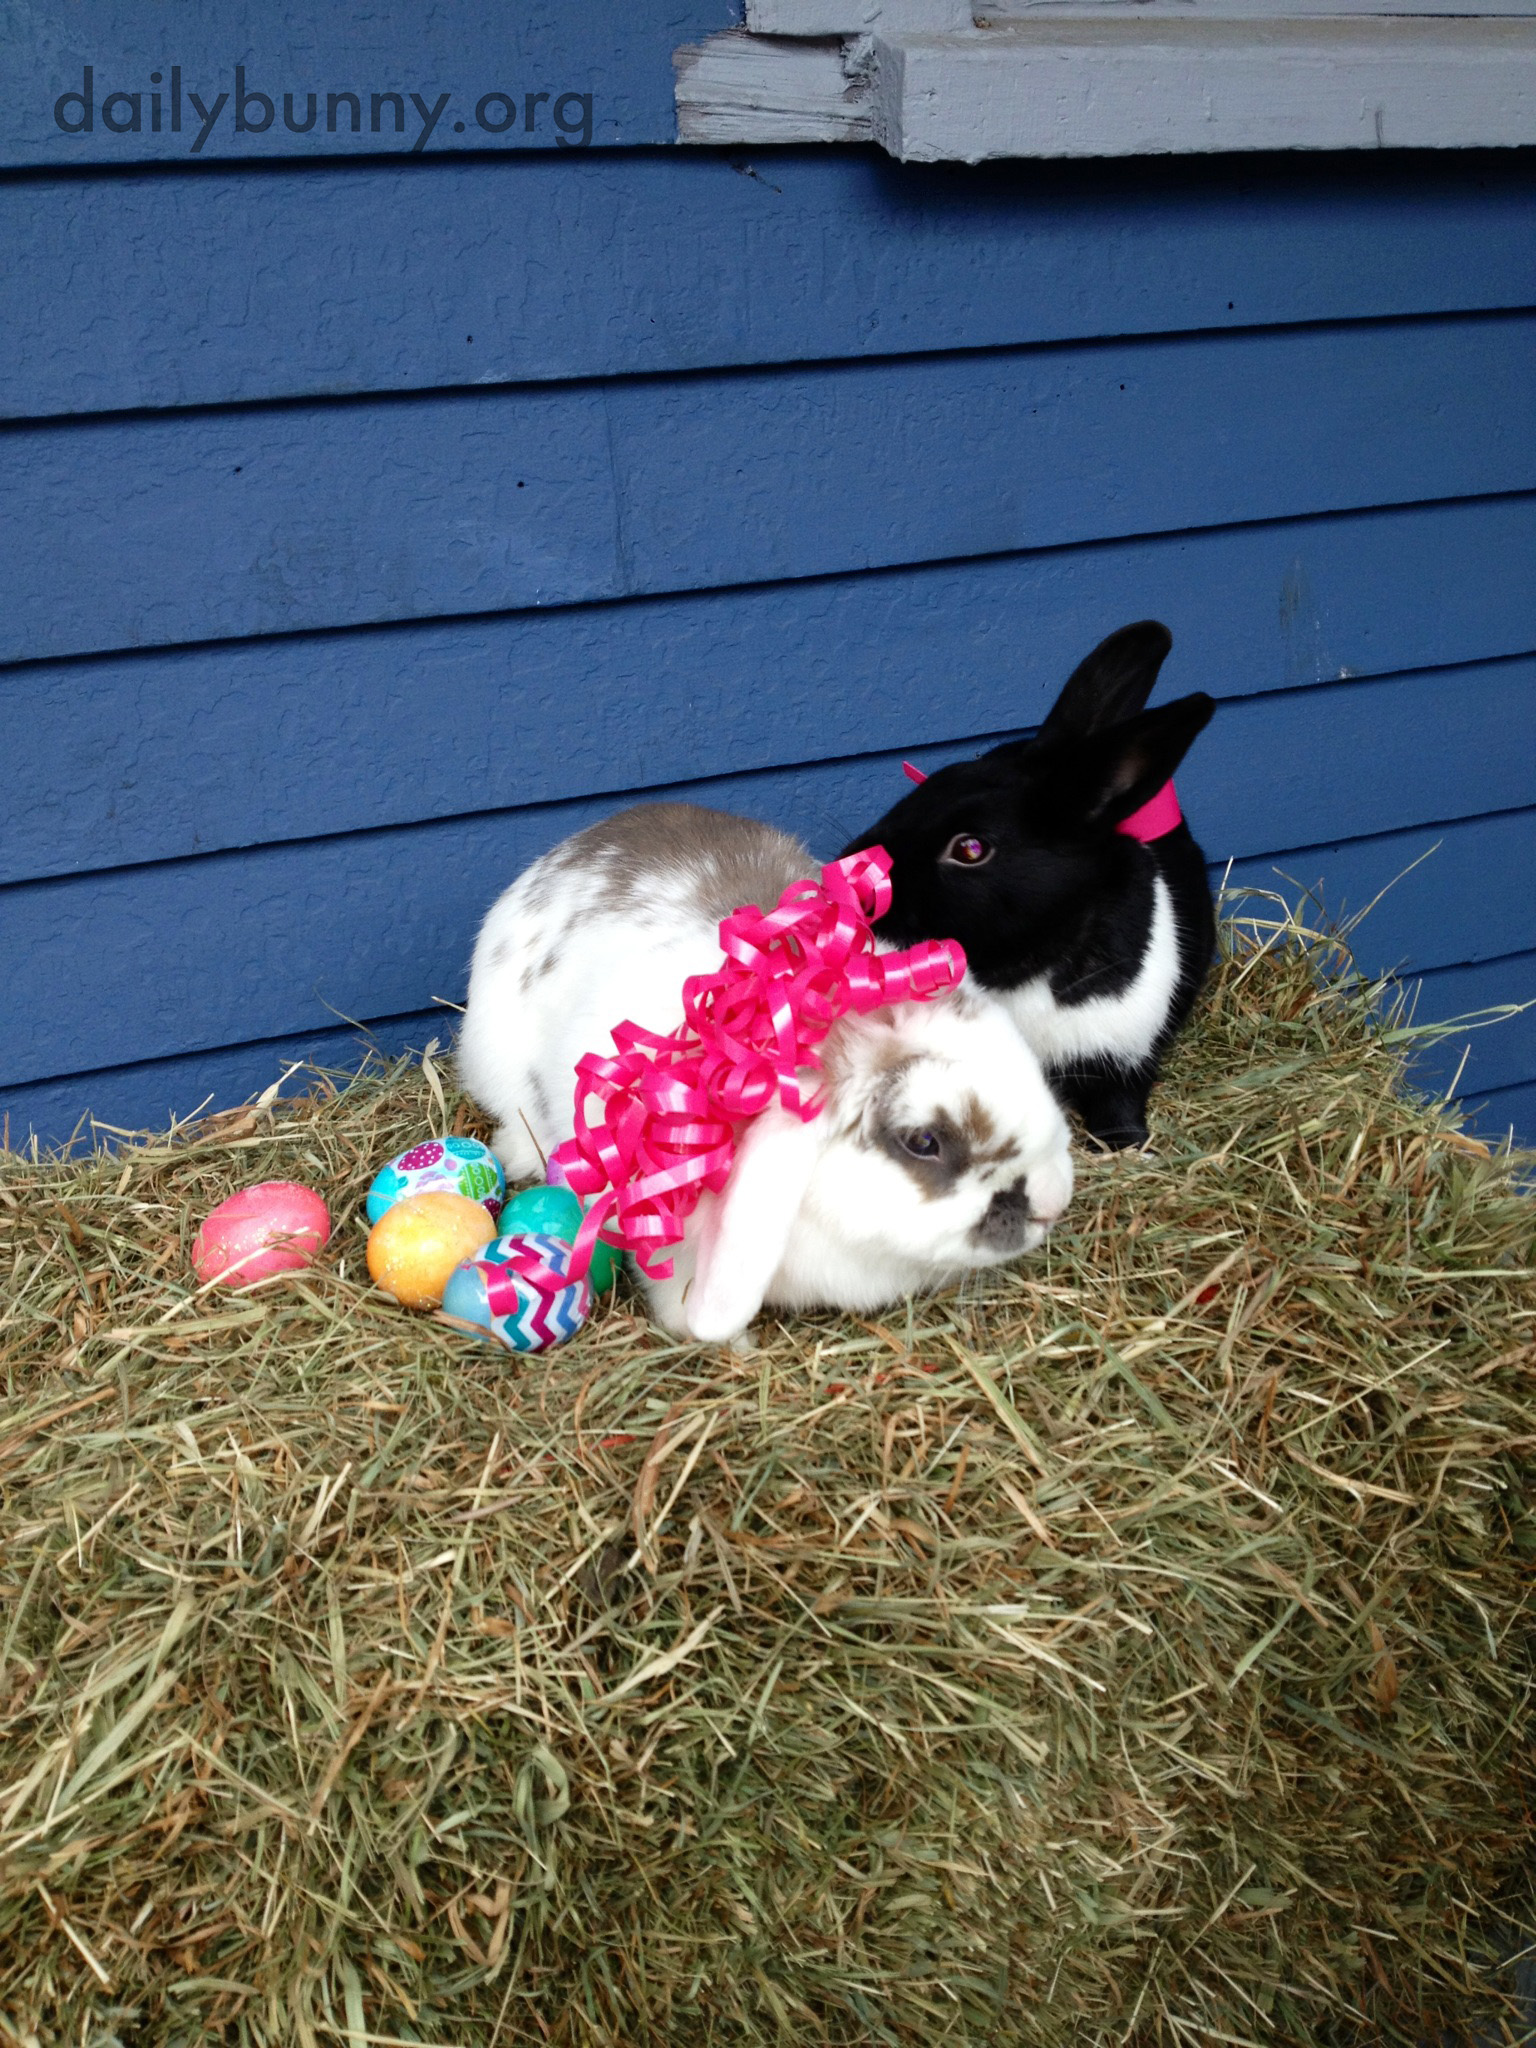 The Daily Bunny's Easter 2014 Mega-Post! 11